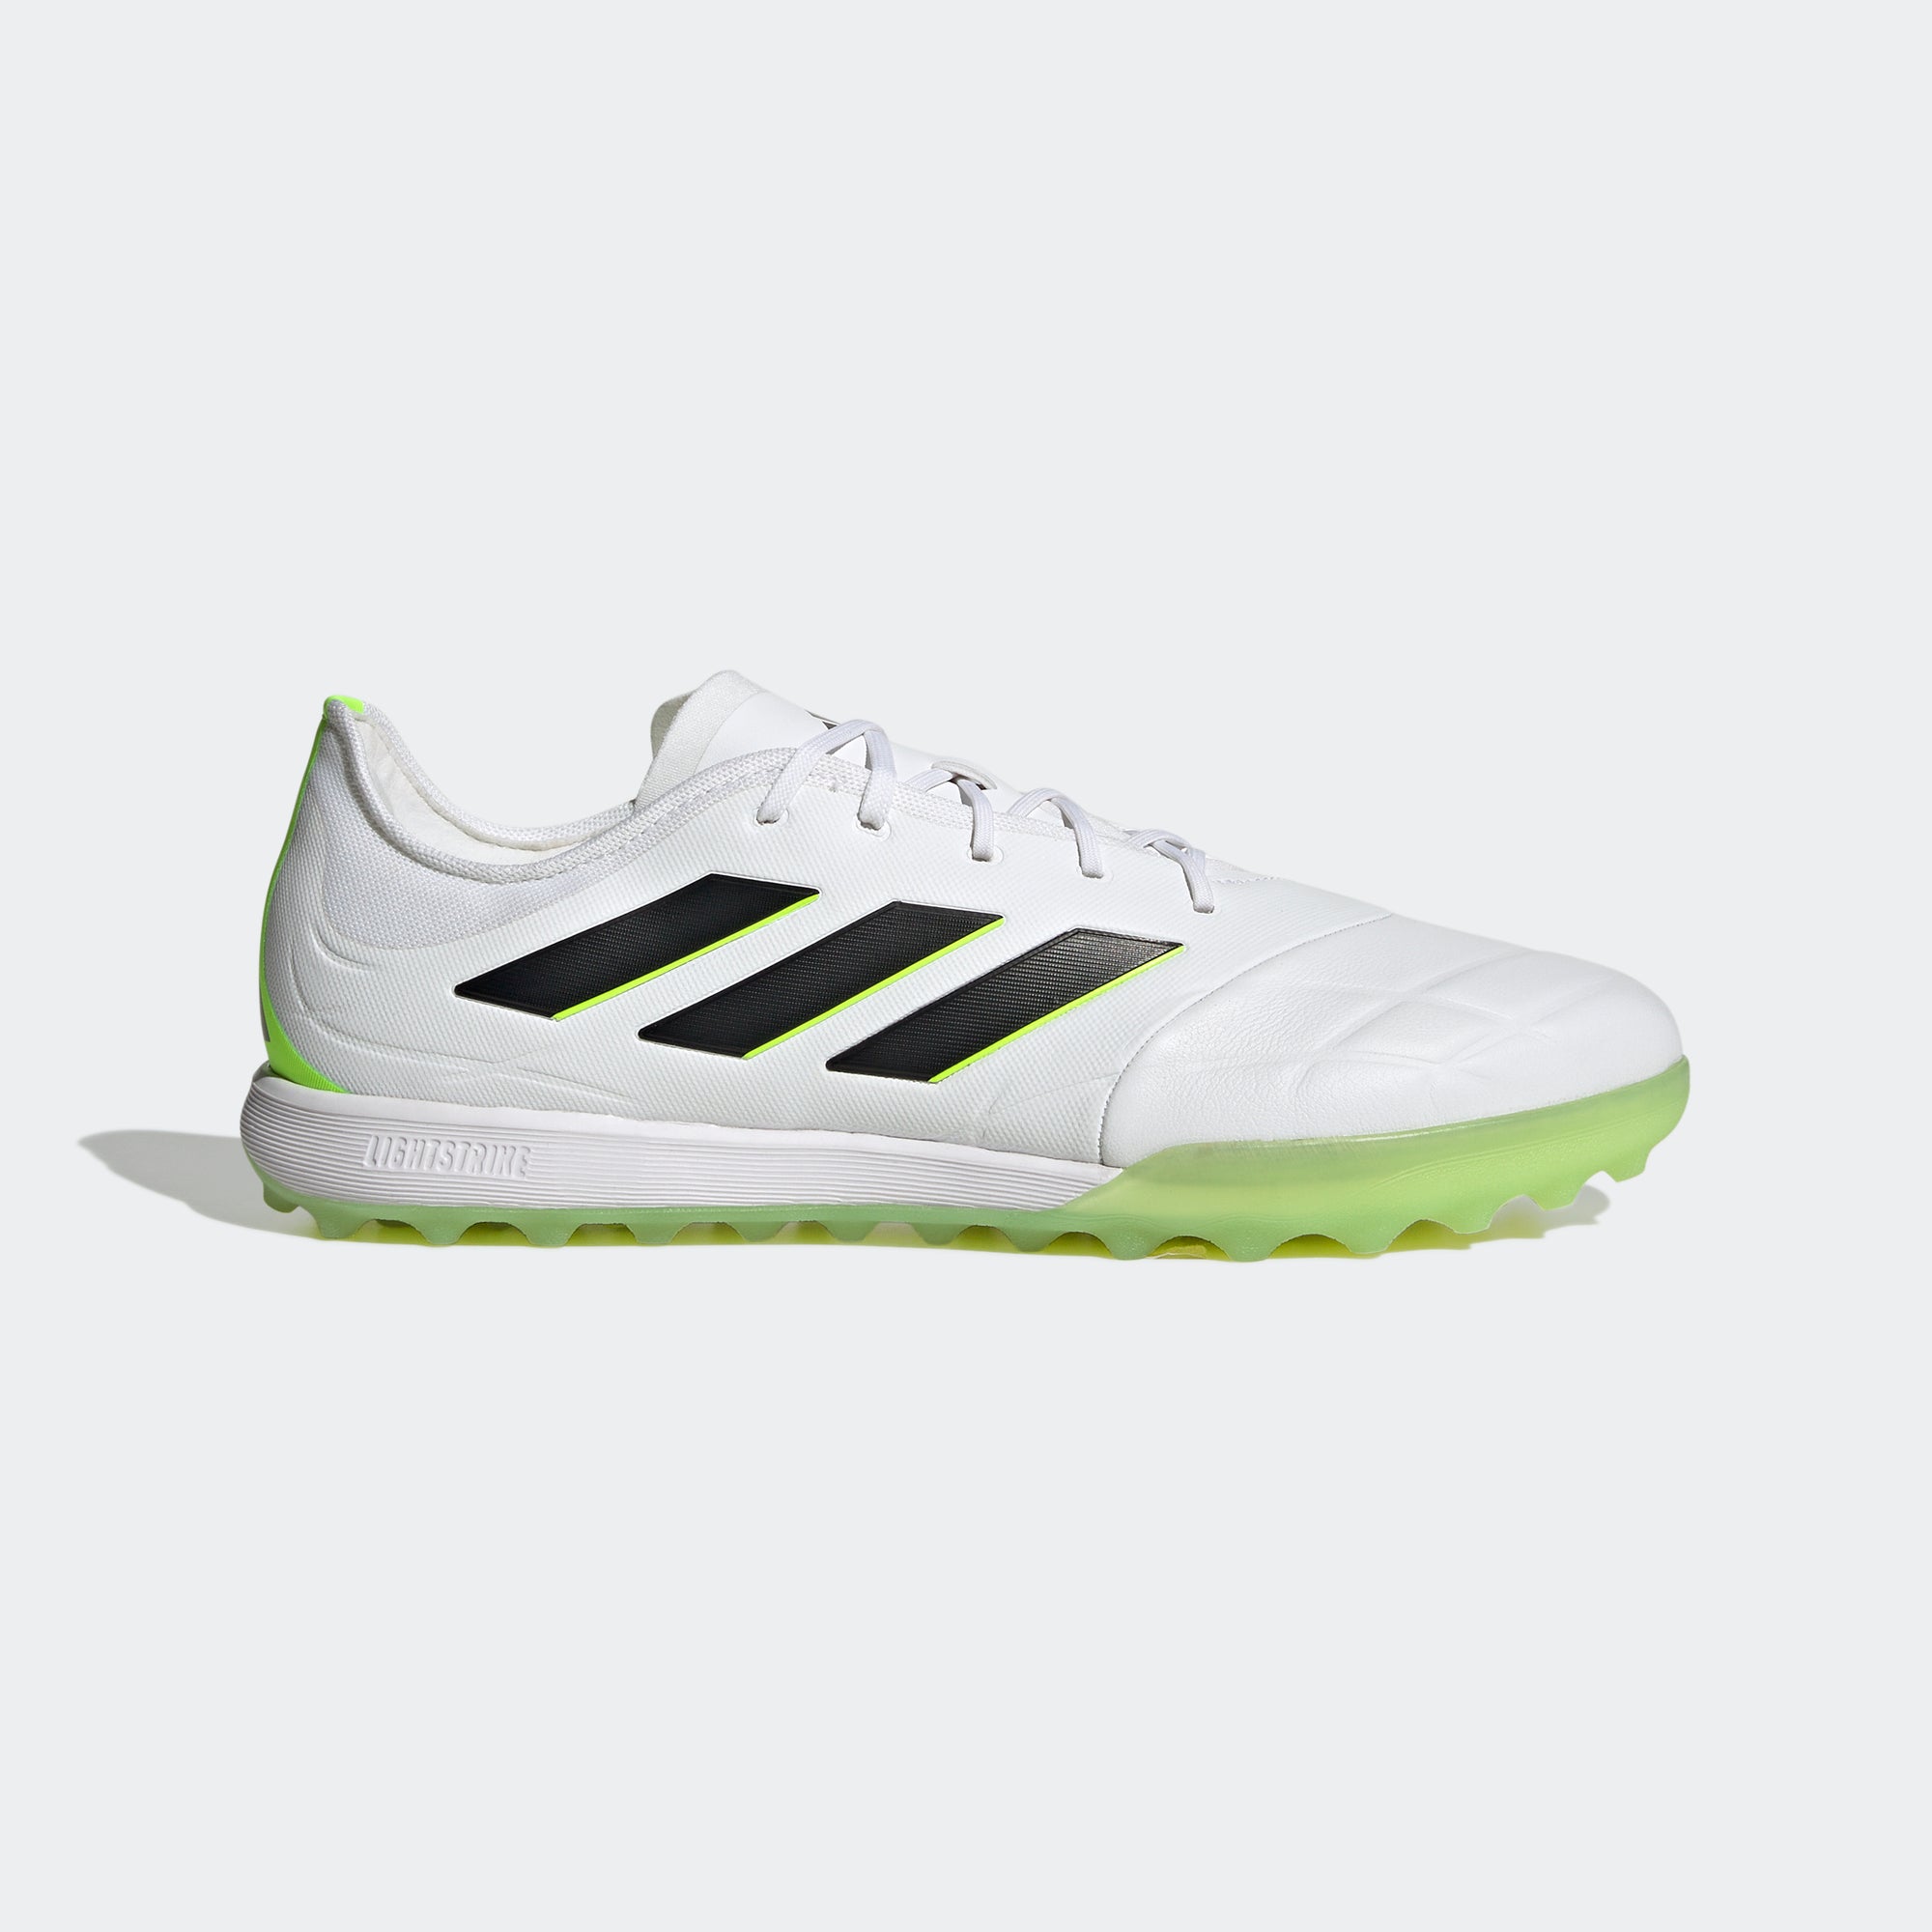 ADIDAS COPA PURE.1 TURF SOCCER SHOES